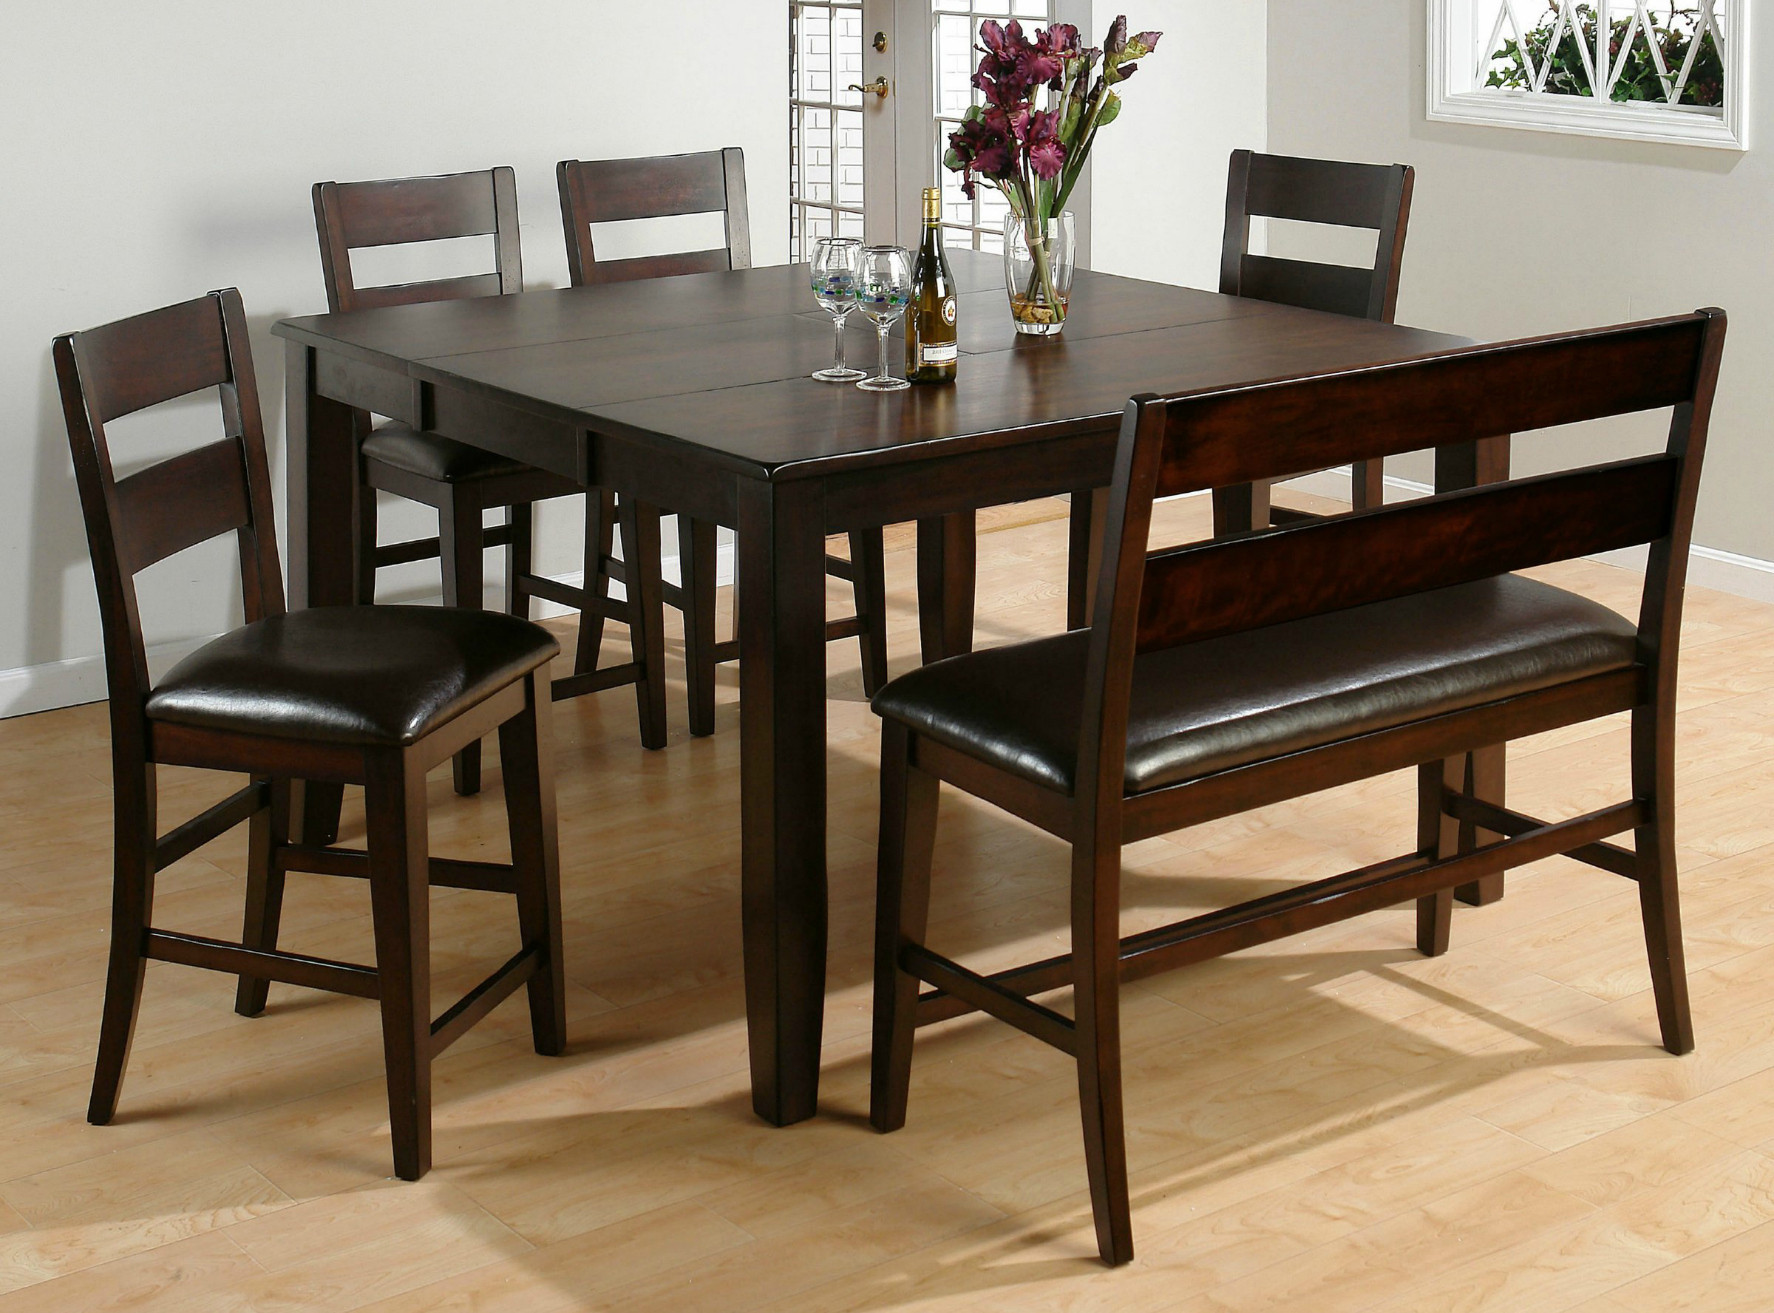 Small High Top Kitchen Table
 High Top Kitchen Table Sets – HomesFeed